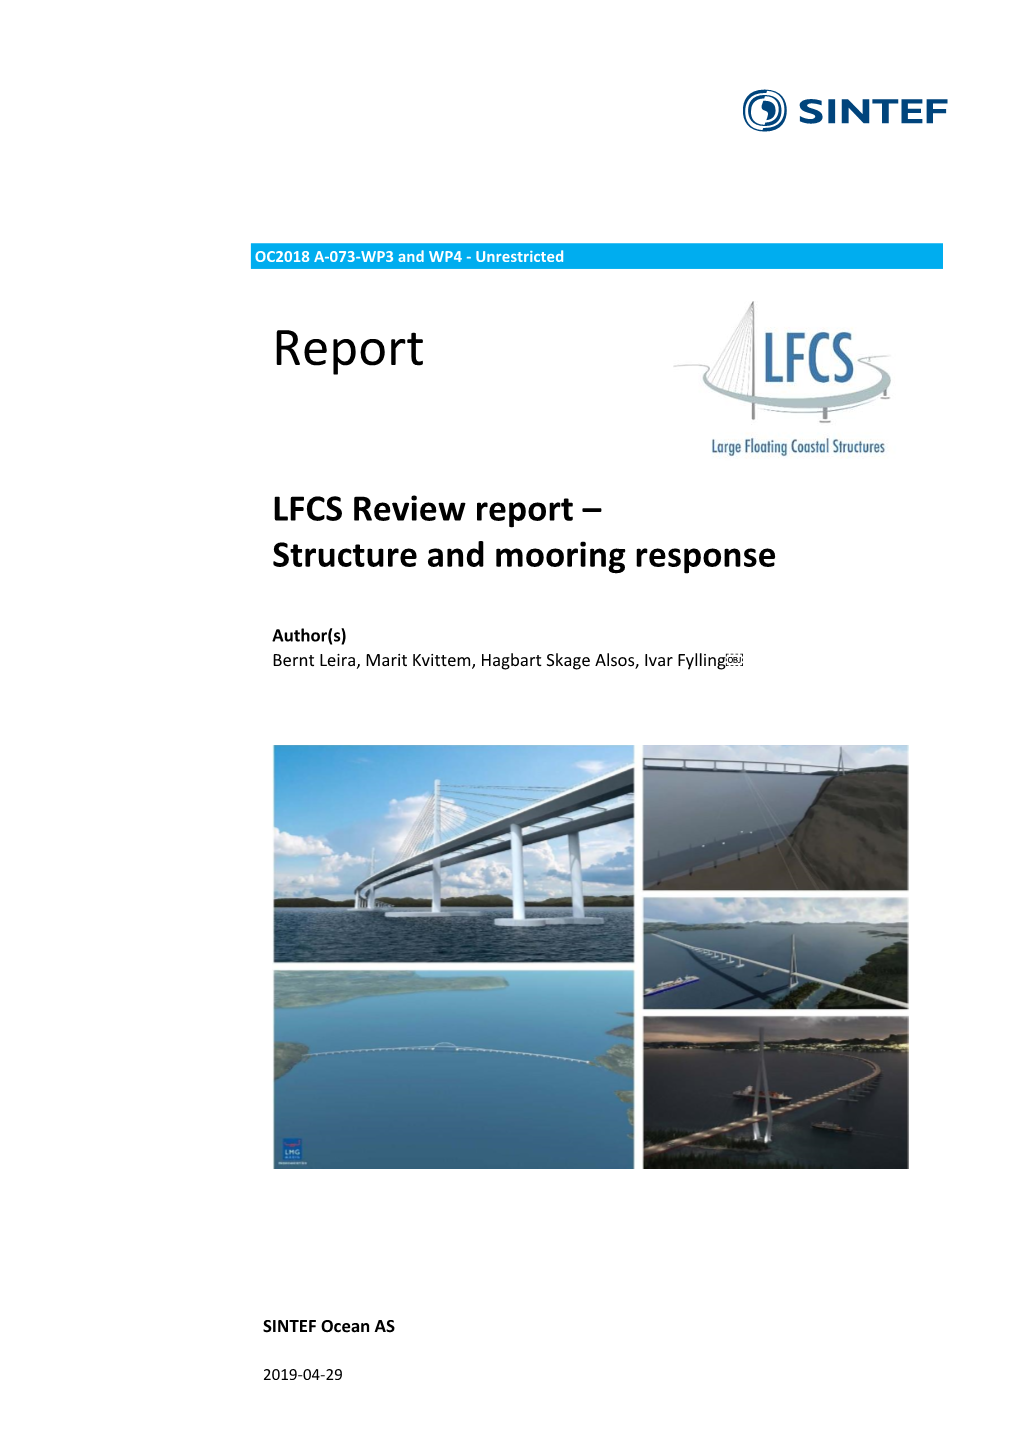 LFCS Review Report – Structure and Mooring Response